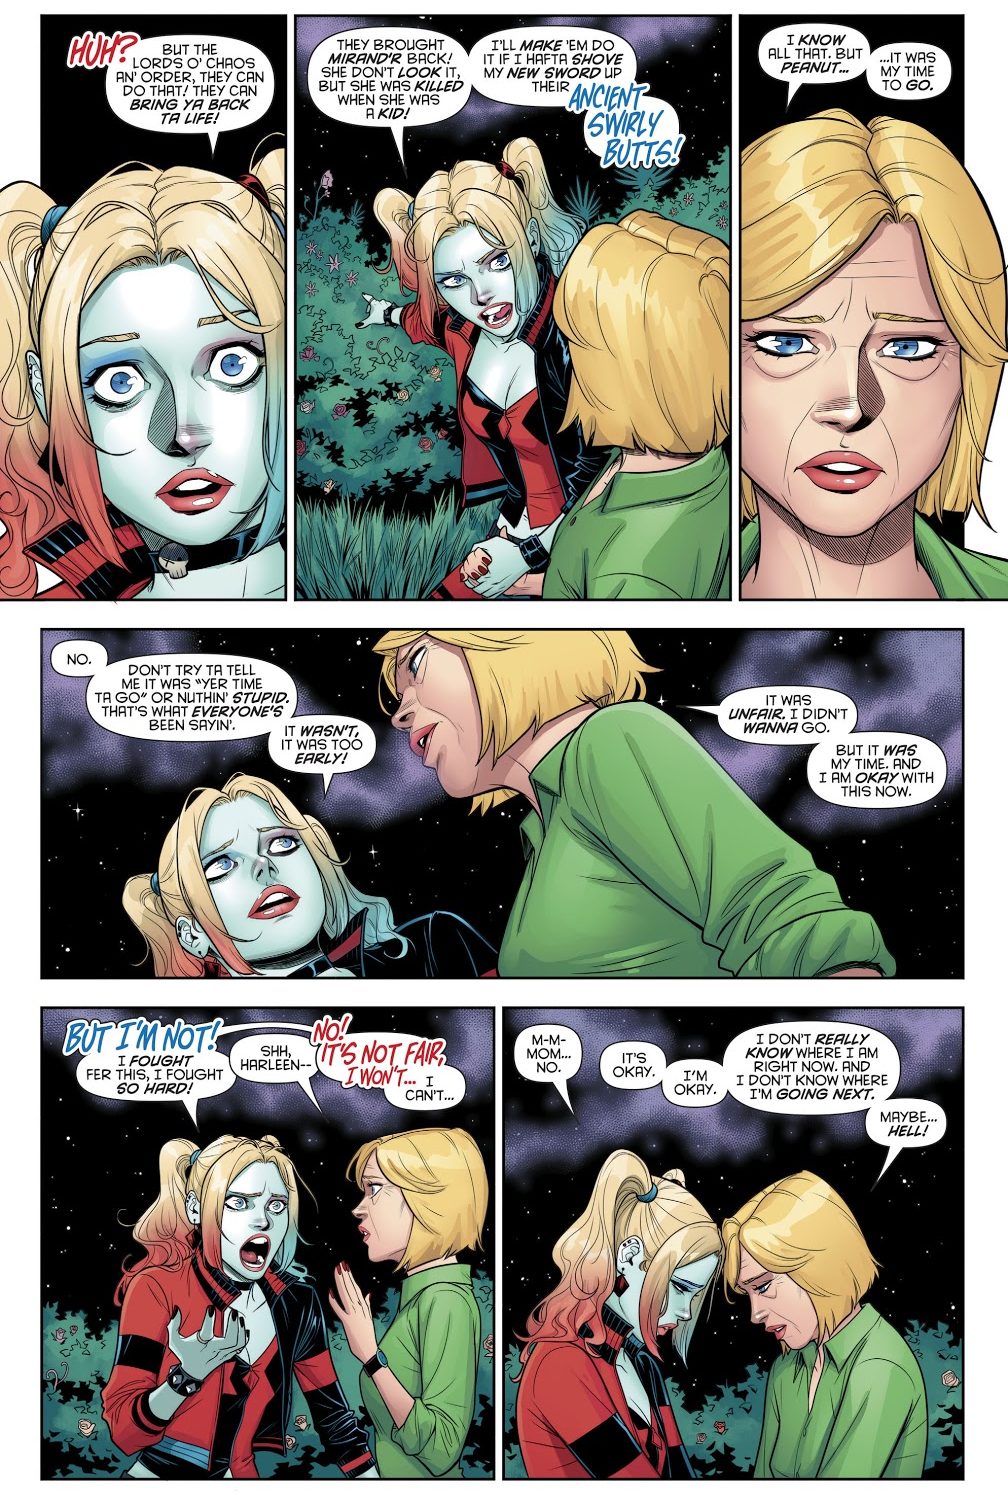 Harley Quinn Says Goodbye To Her Mother's Spirit 